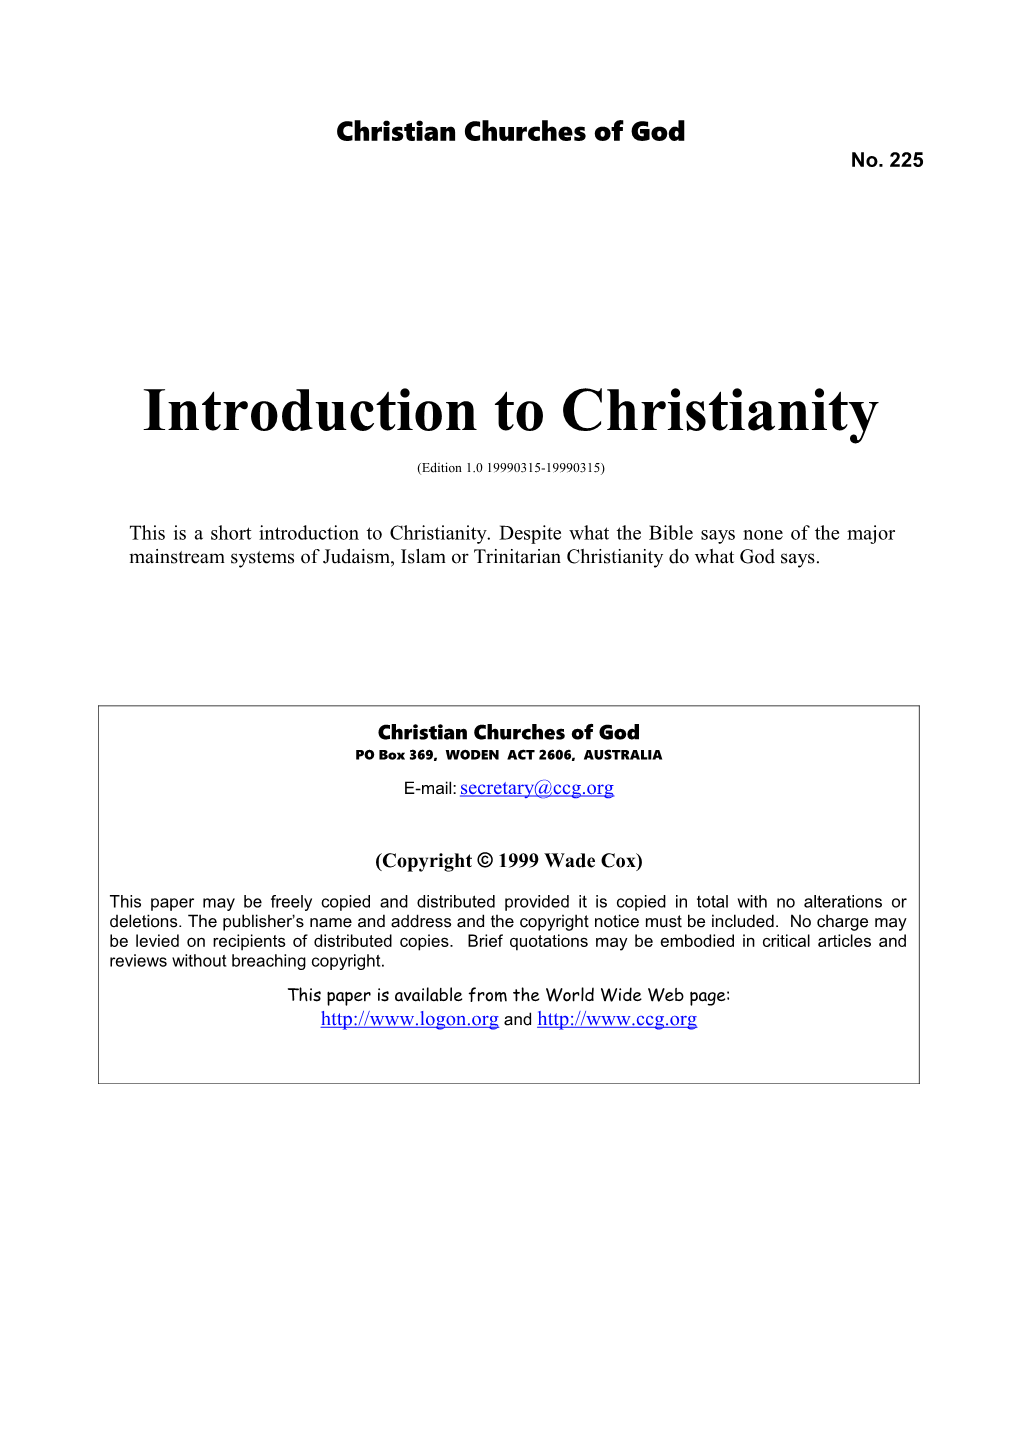 Introduction to Christianity (No. 225)